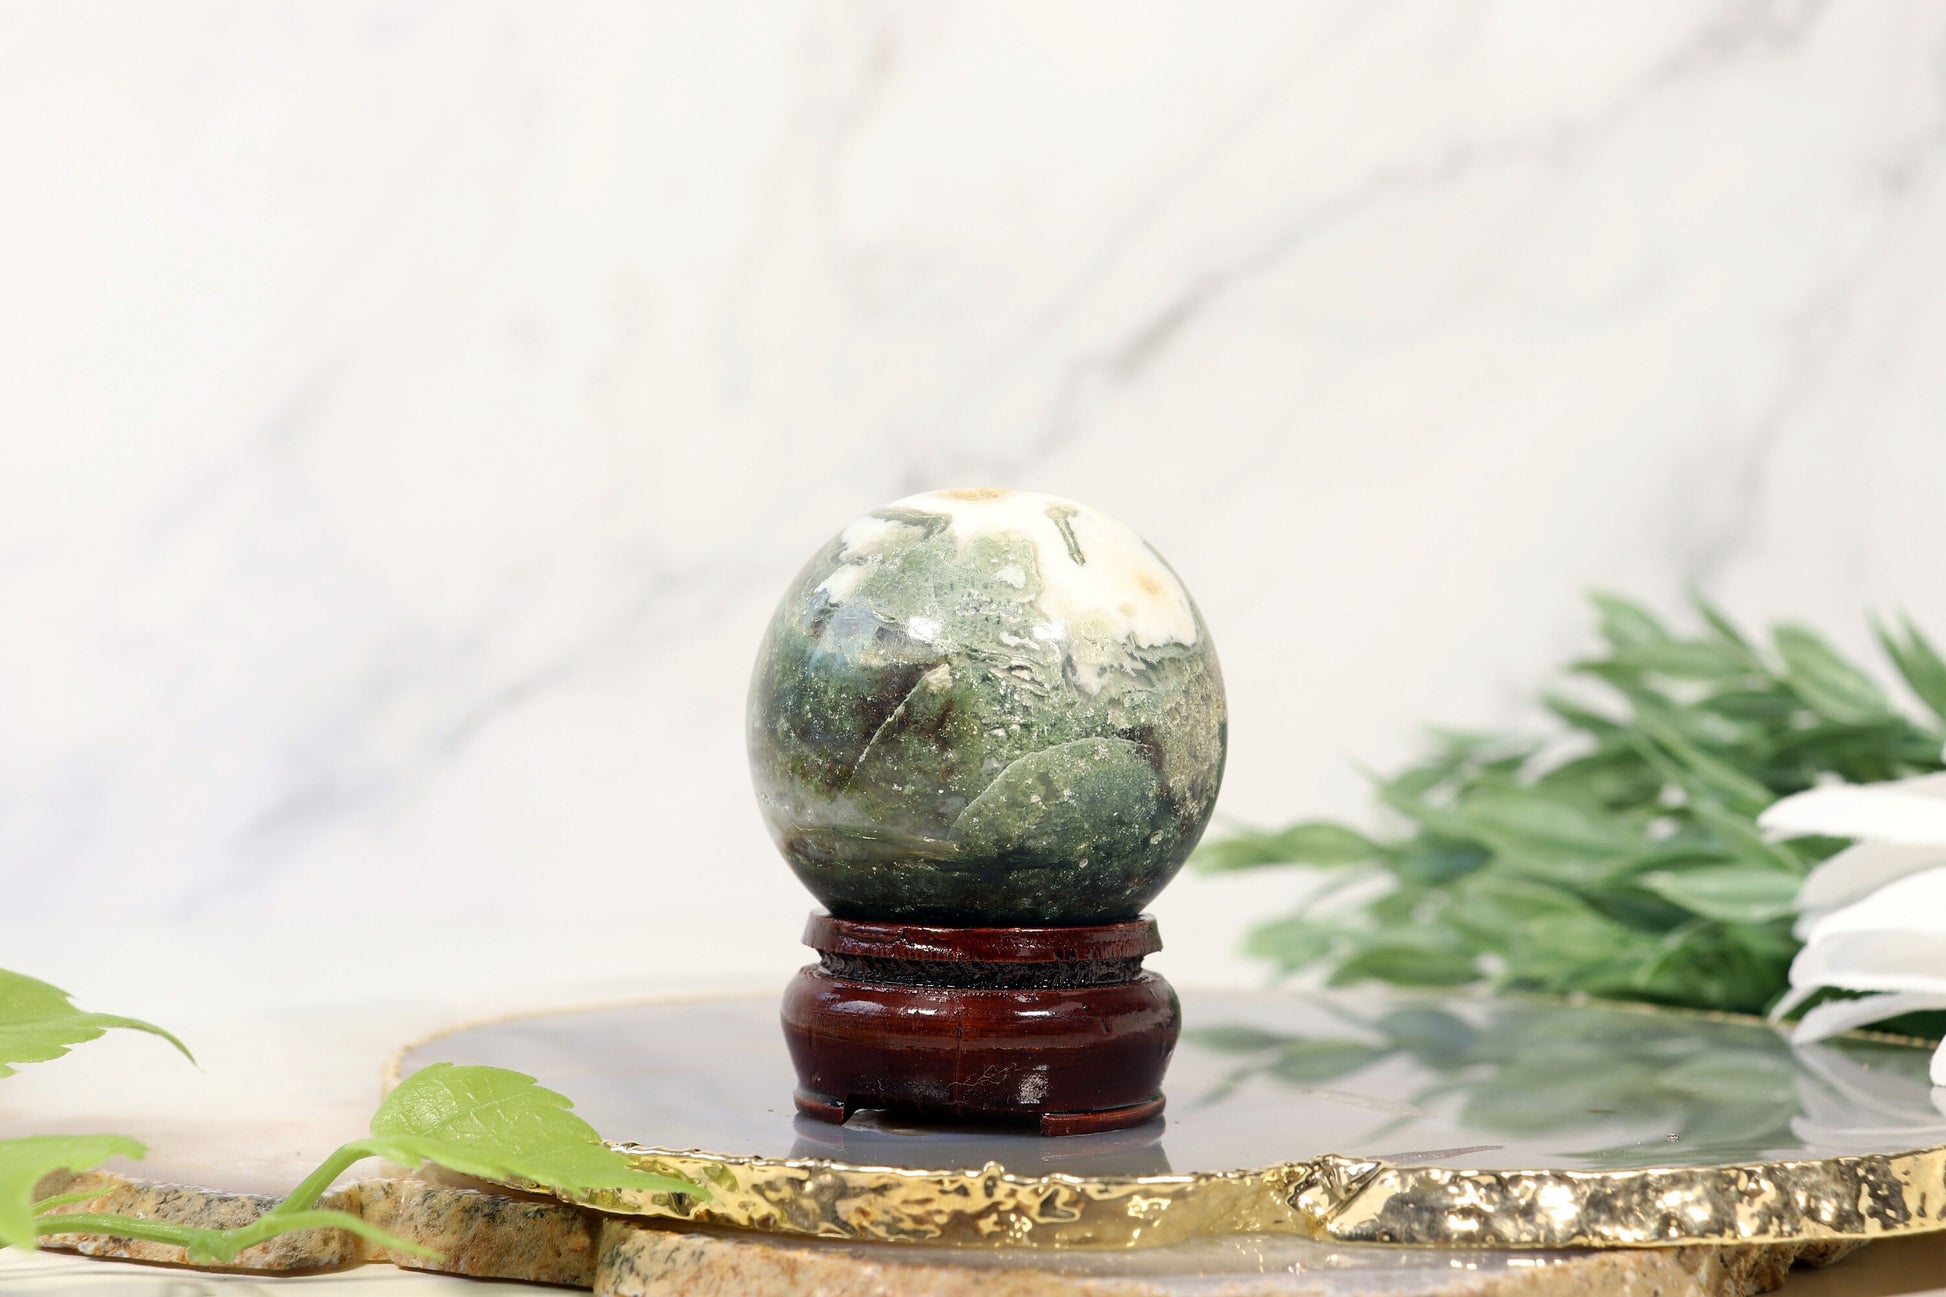 Moss Agate Sphere with Druzy Pockets and Full of Character